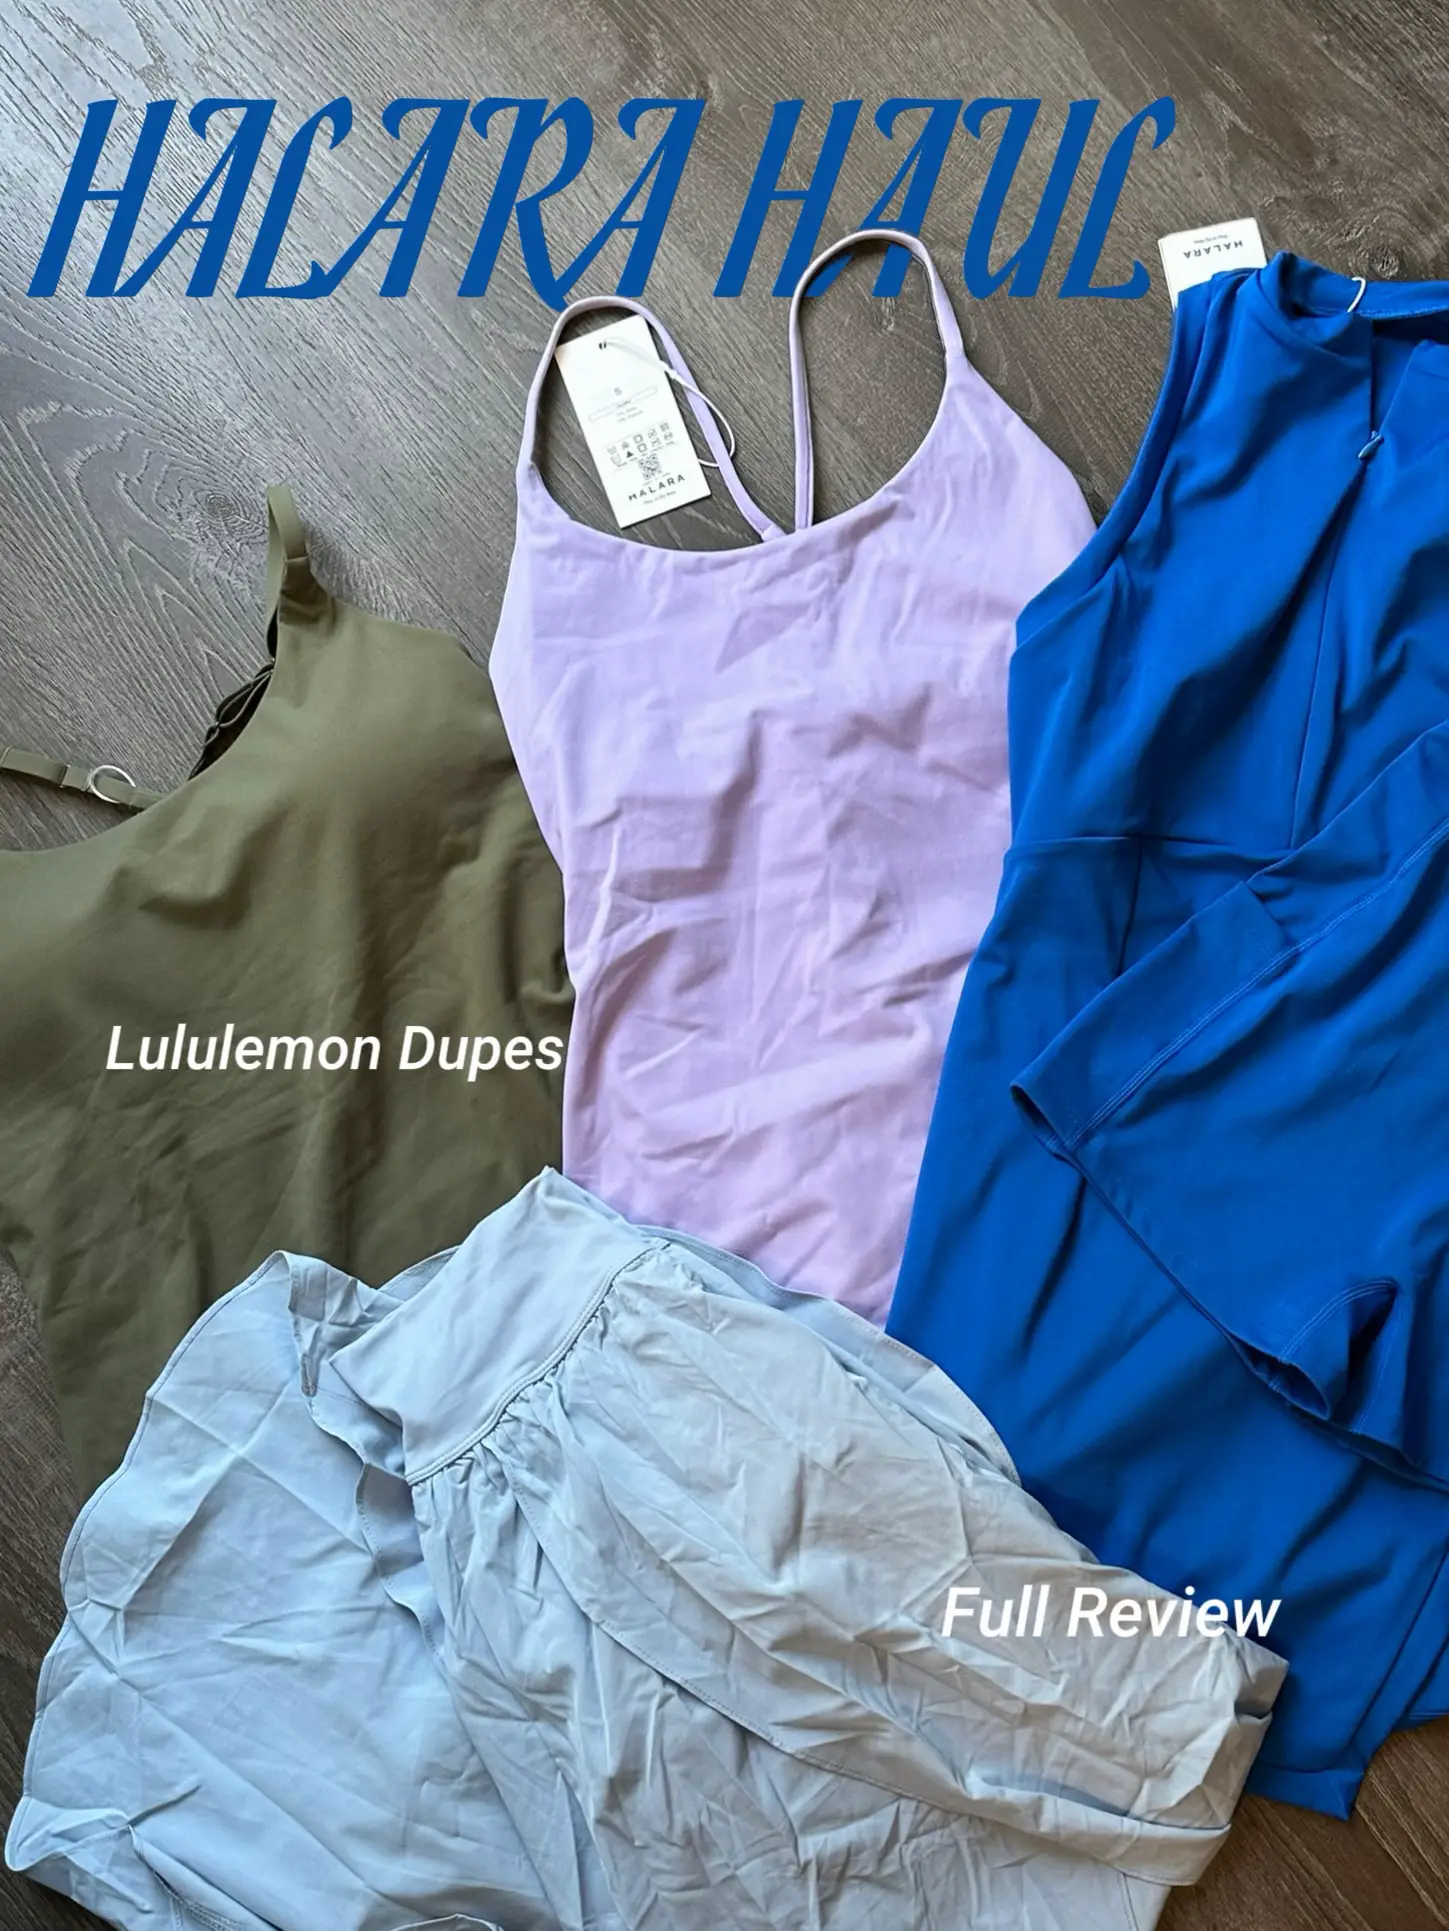 HAUL + REVIEW: HALARA ACTIVE 🤸🏼‍♂️, Gallery posted by Destynee Lace